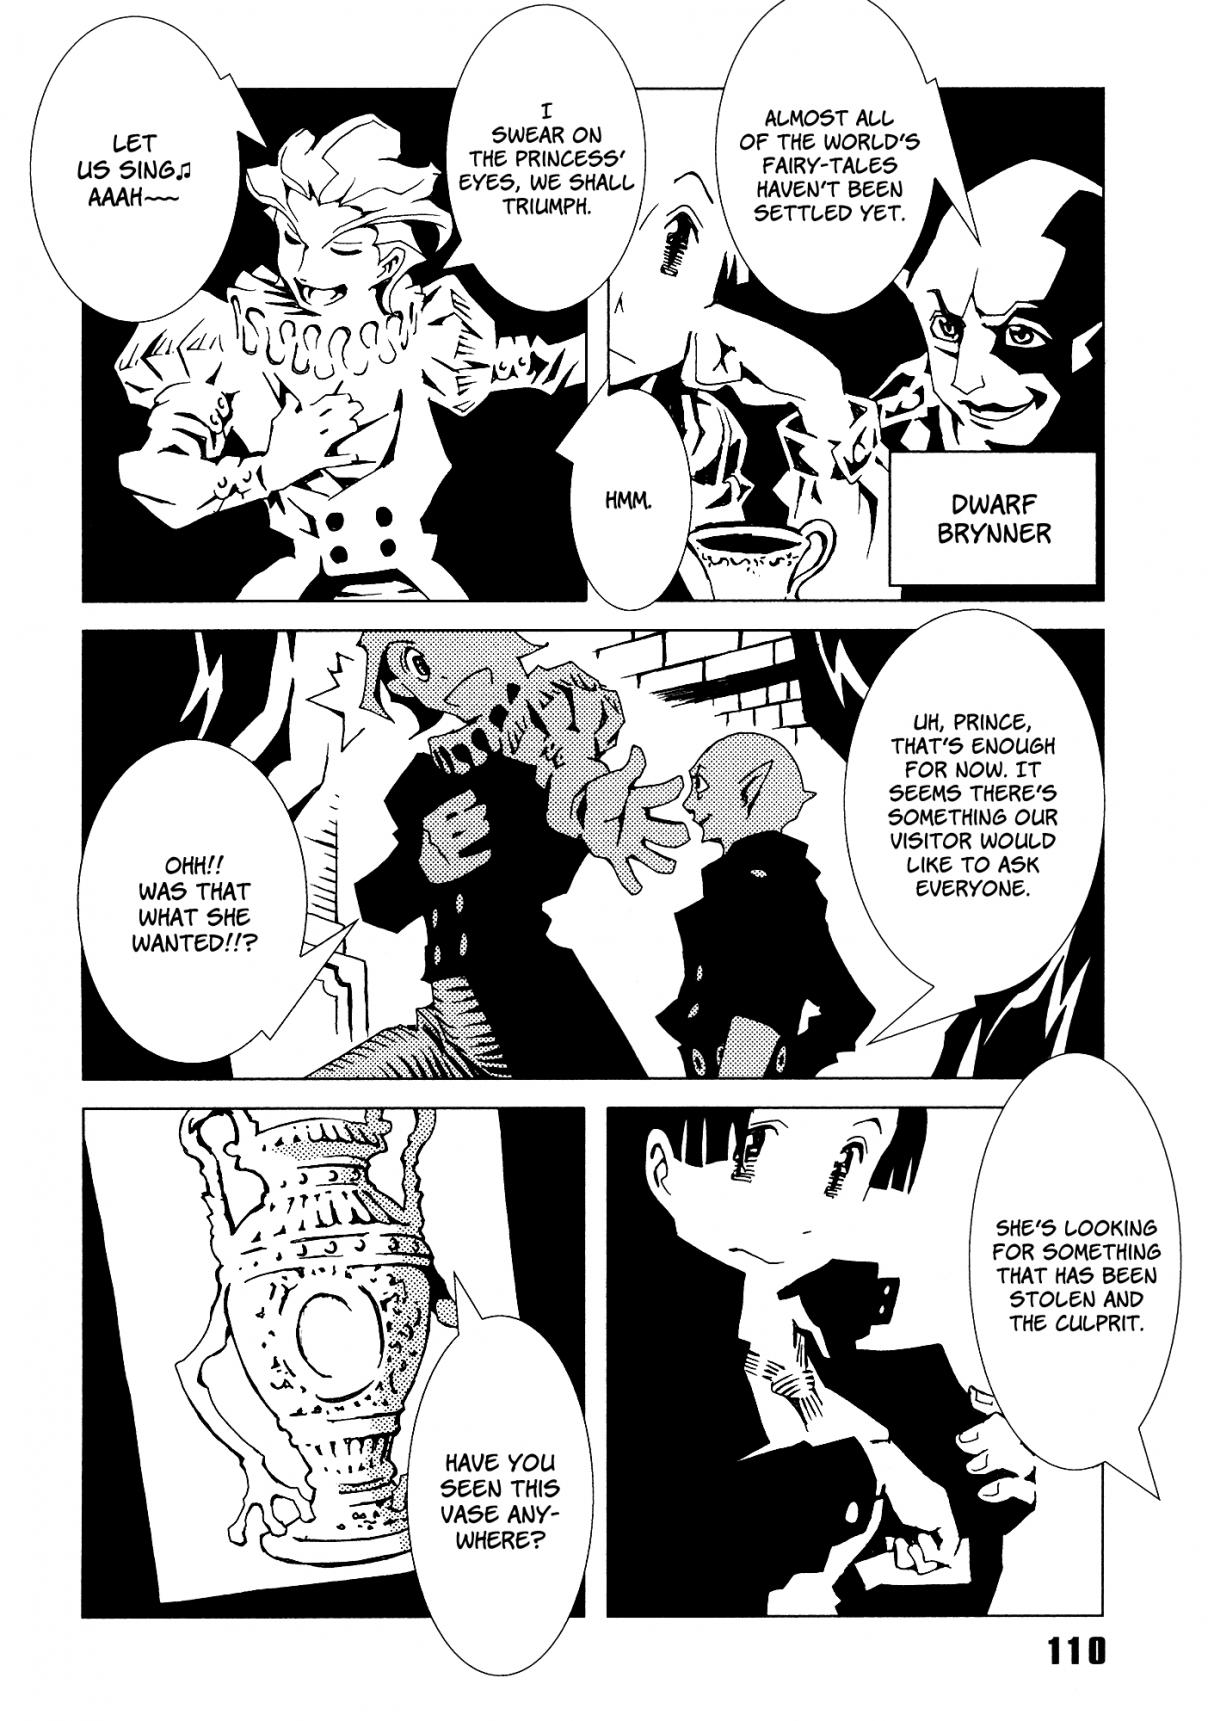 Area 51 Vol. 4 Ch. 15 You Guys Still Doing Situation for 800 Years?